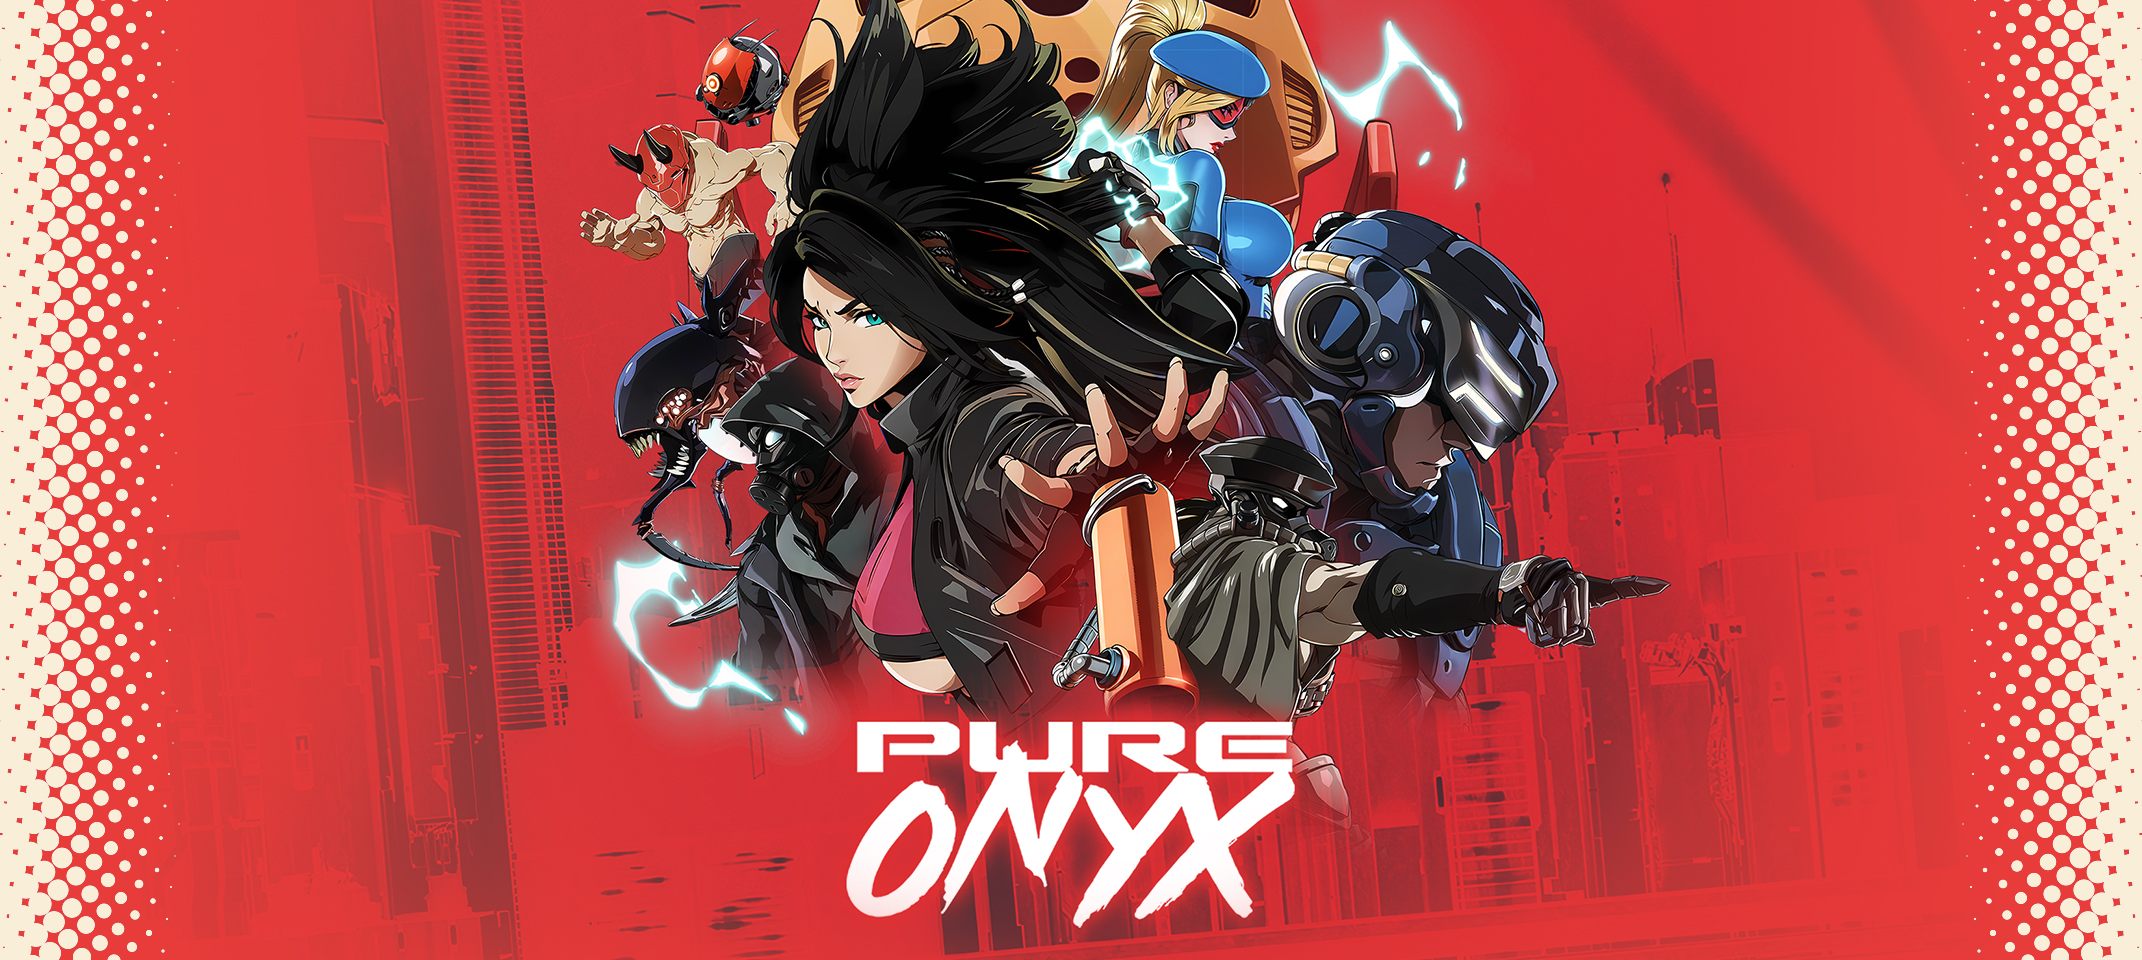 Pure Onyx PS5 Version Full Game Free Download